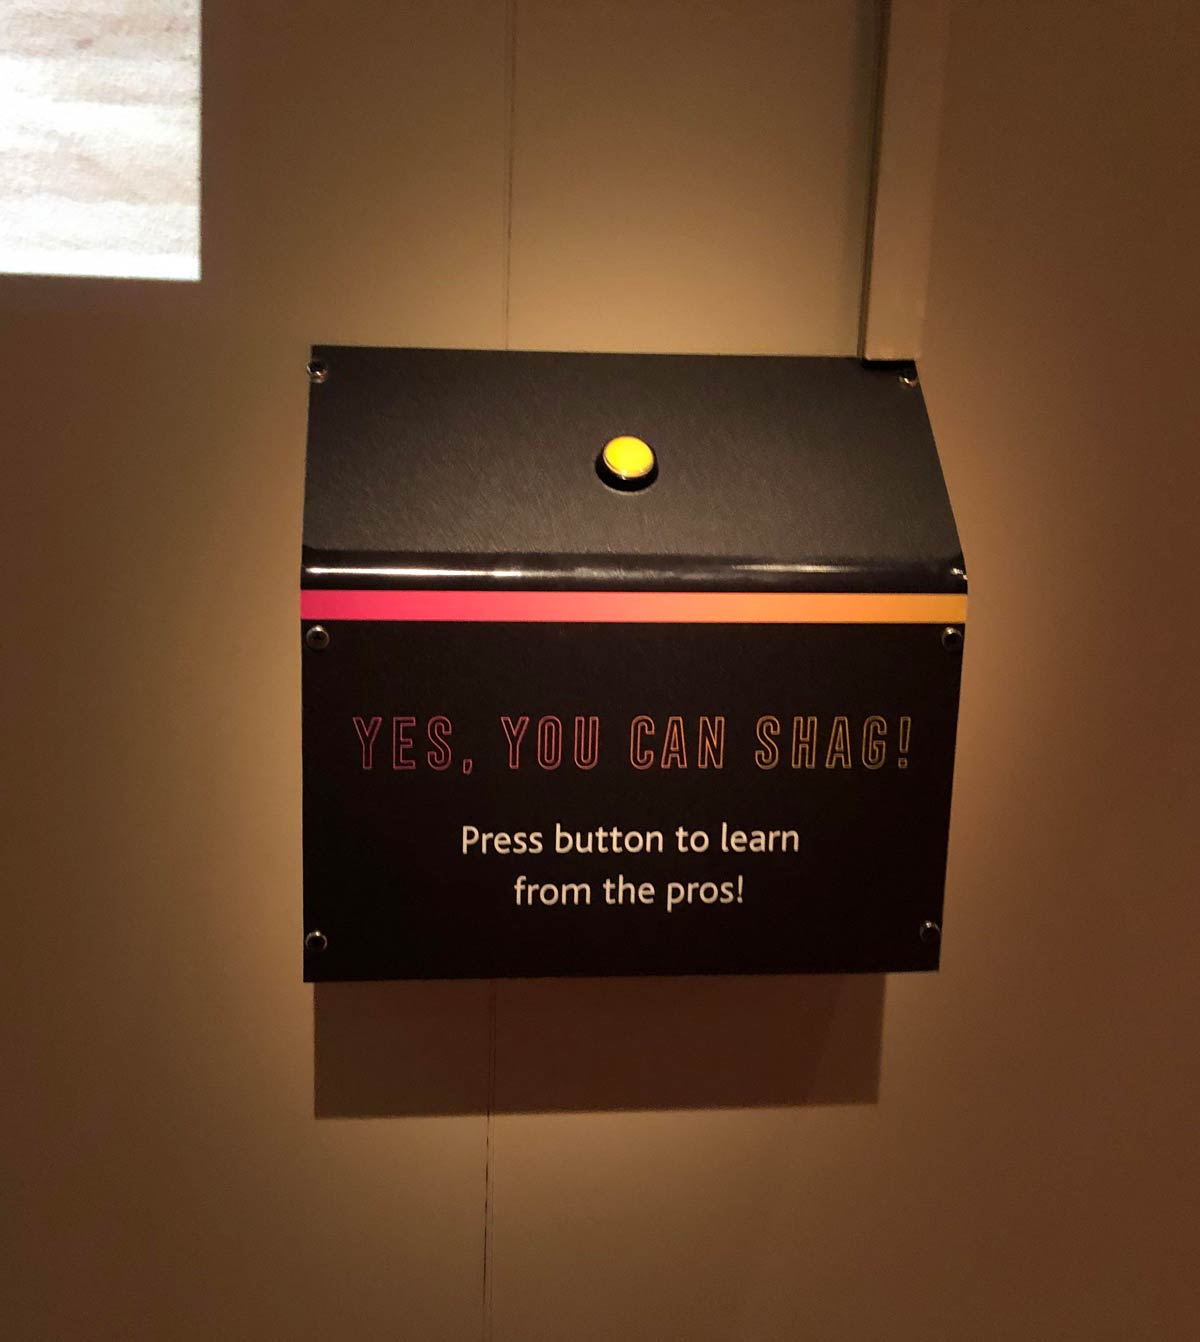 Found this sign in a history museum at a dance exhibit